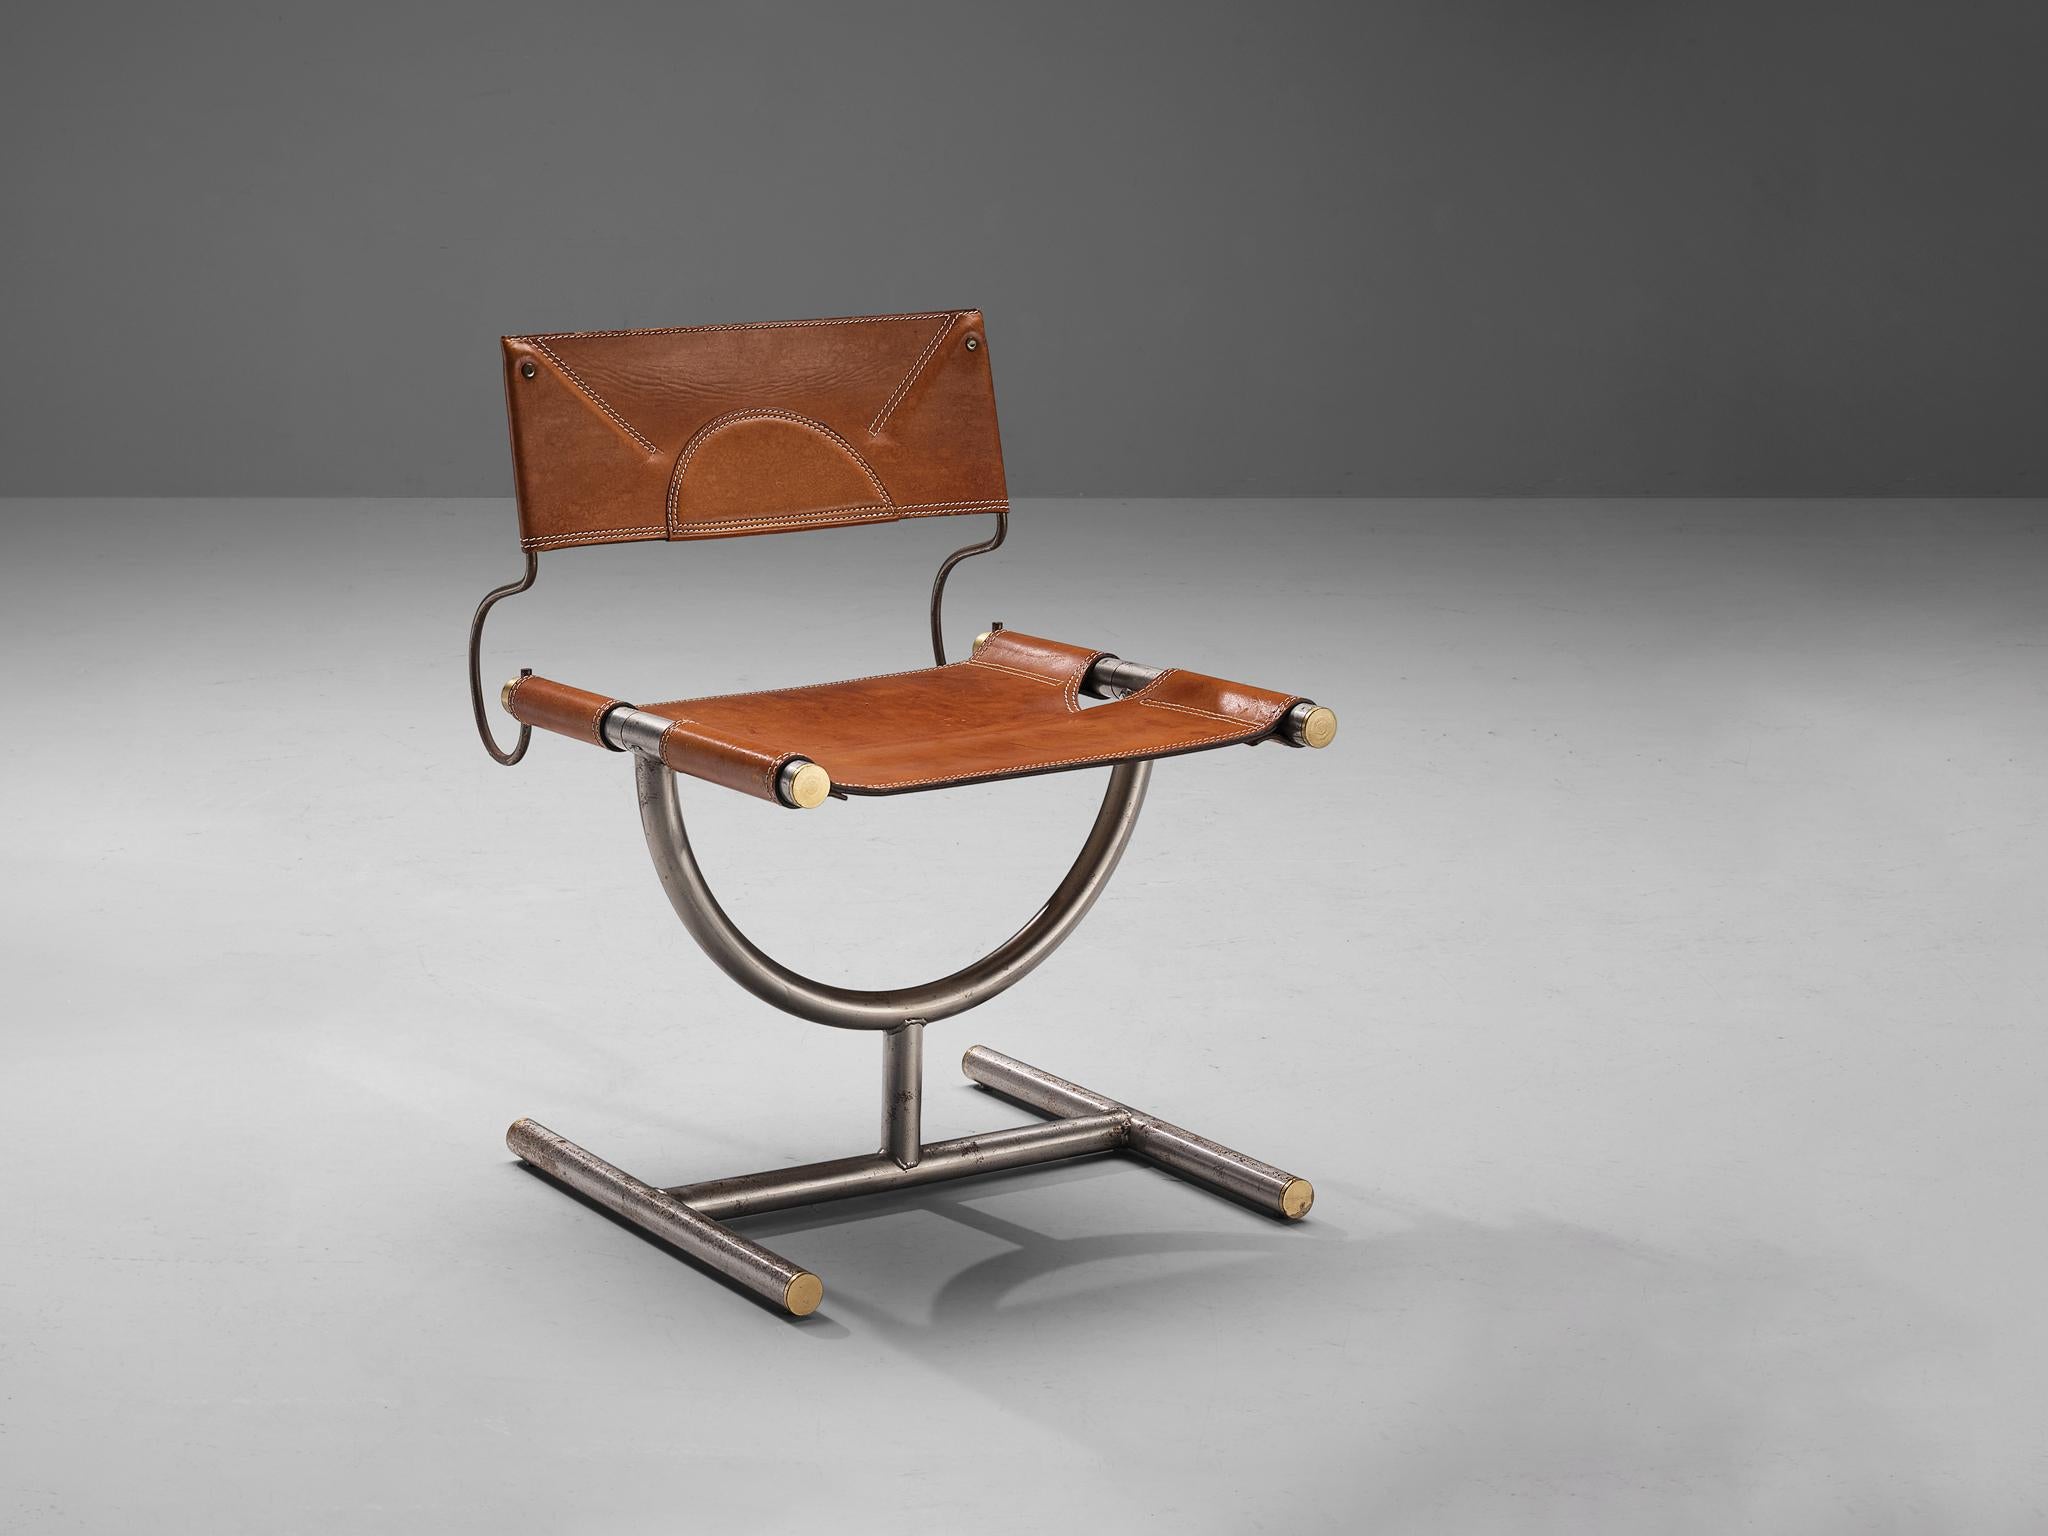 Afra & Tobia Scarpa for Benetton Office, chair, brass, leather, steel, Italy, 1985.

This chair is designed for the office of the clothing brand Benetton by Afra & Tobia Scarpa. This chair is executed in original cognac leather and tubular steel.